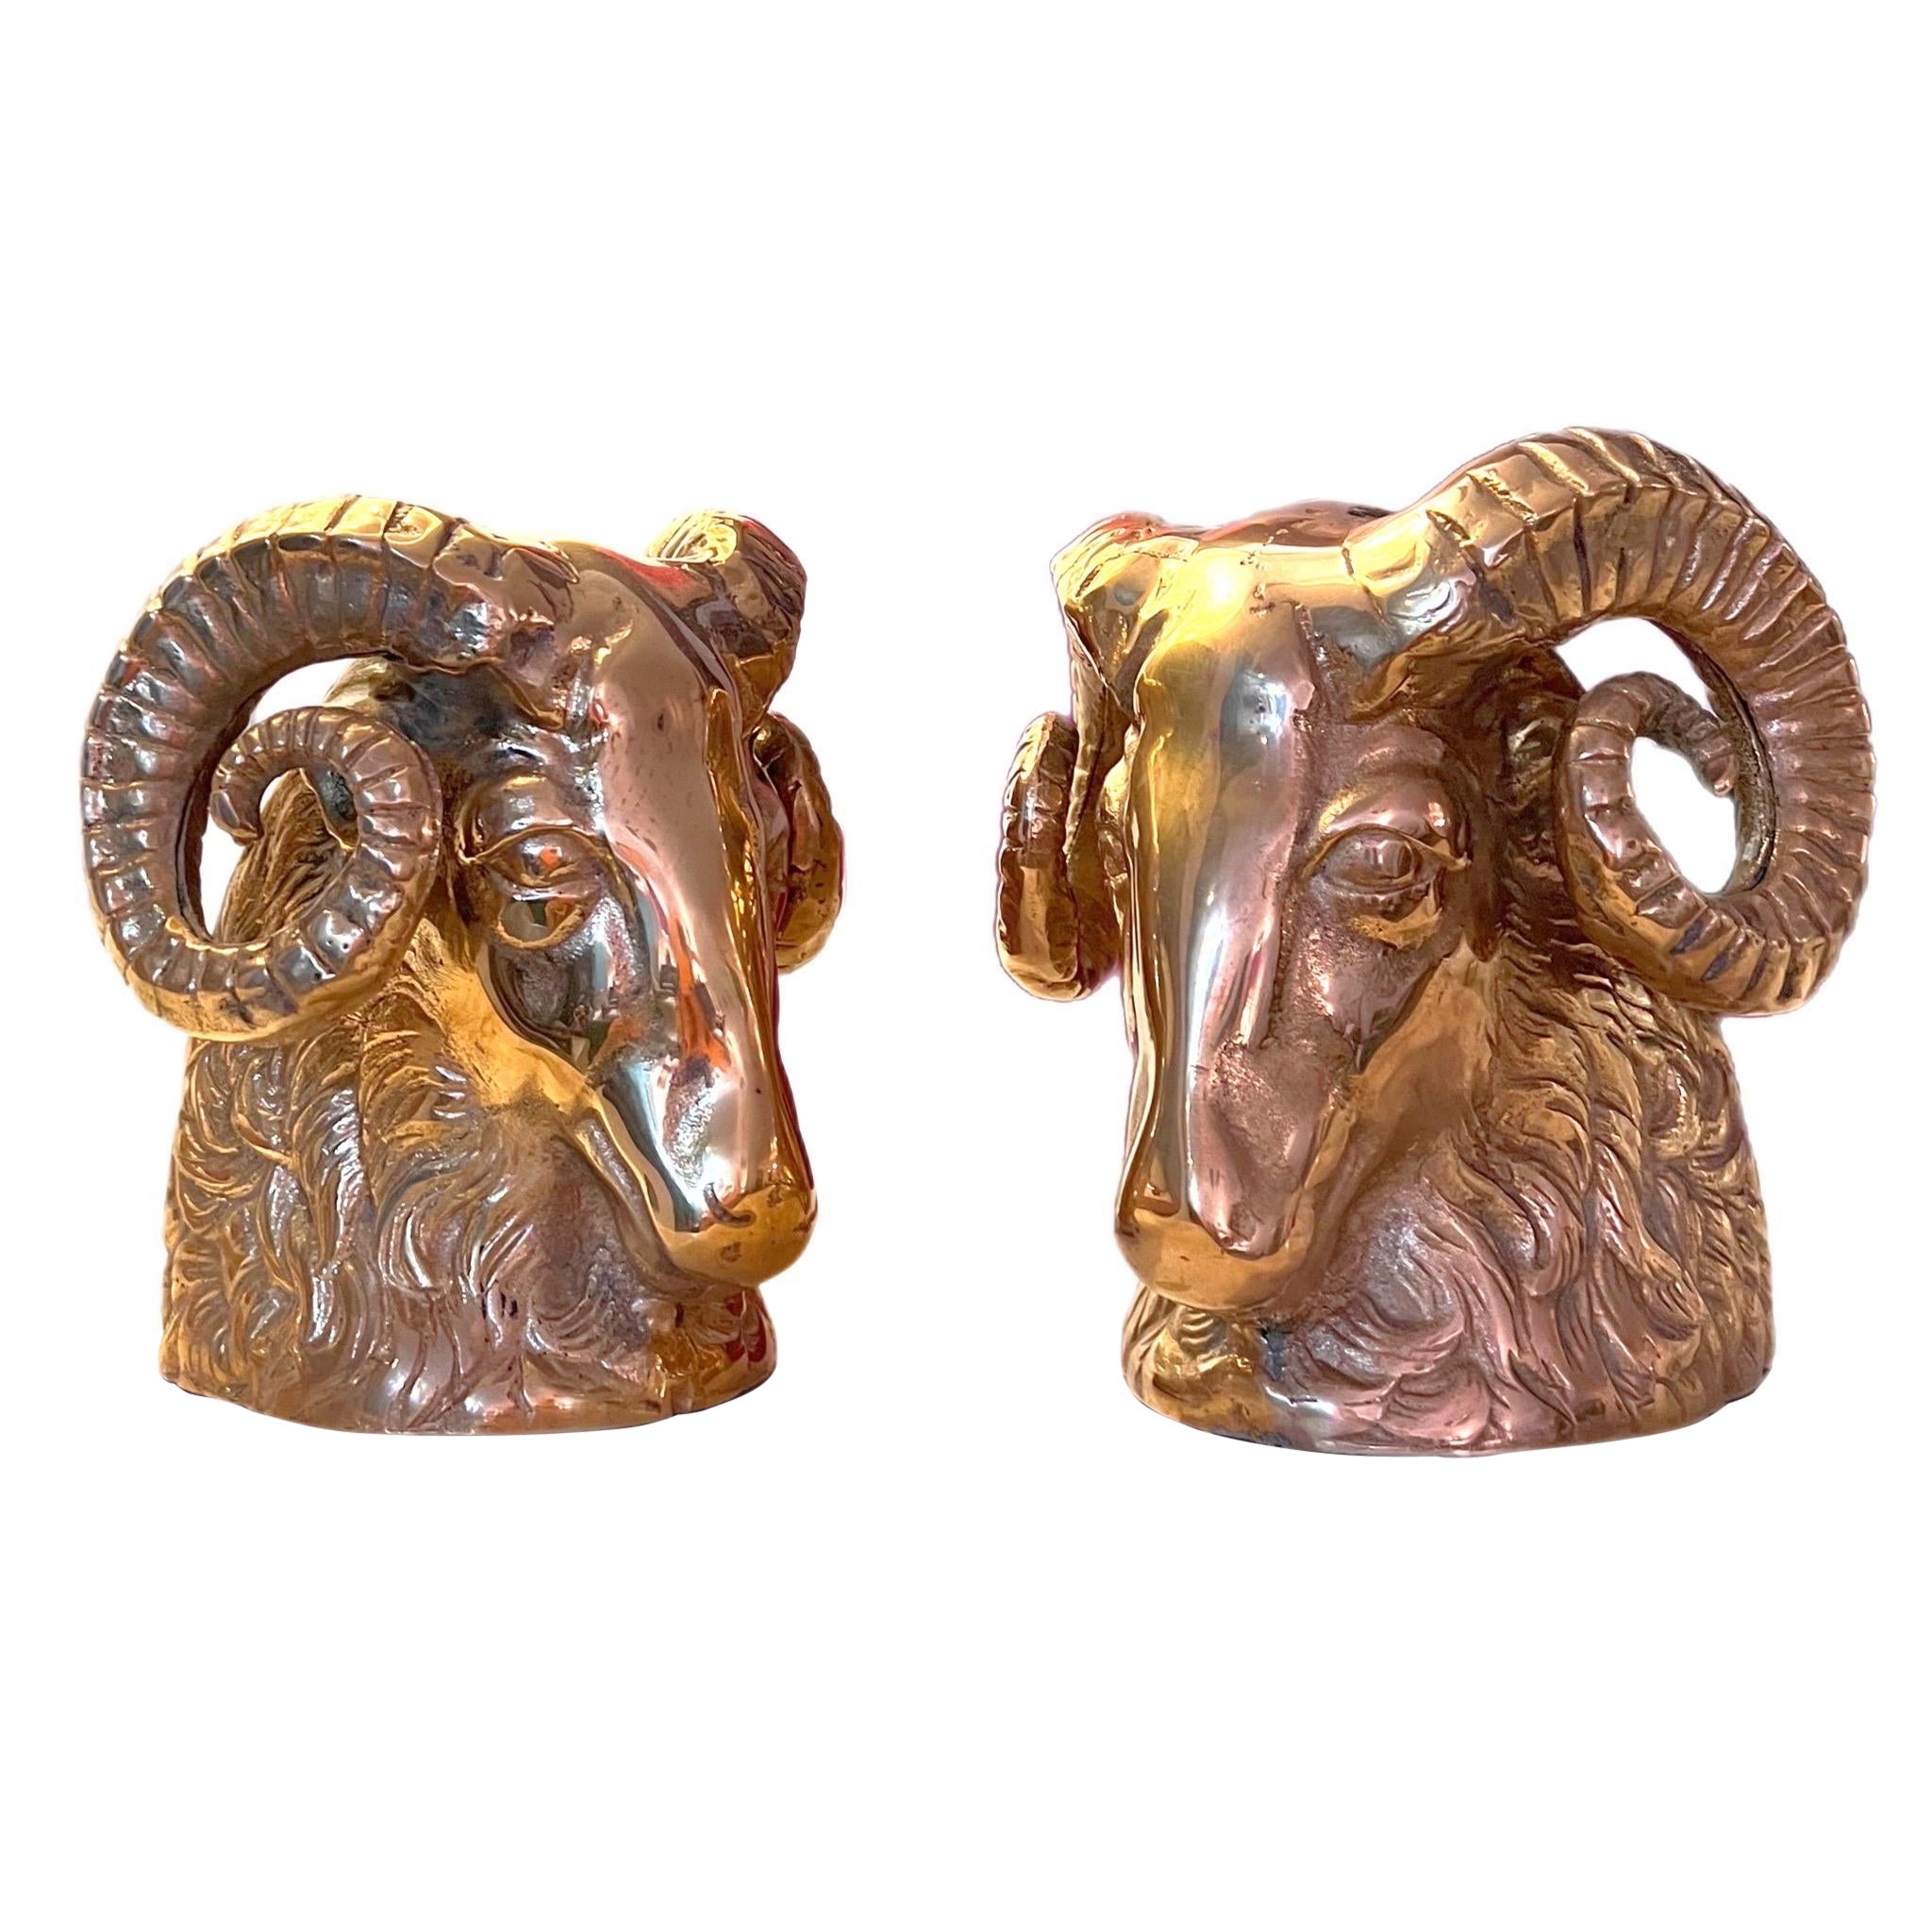 Vintage Brass Big Horn Ram Bookends, a Pair For Sale